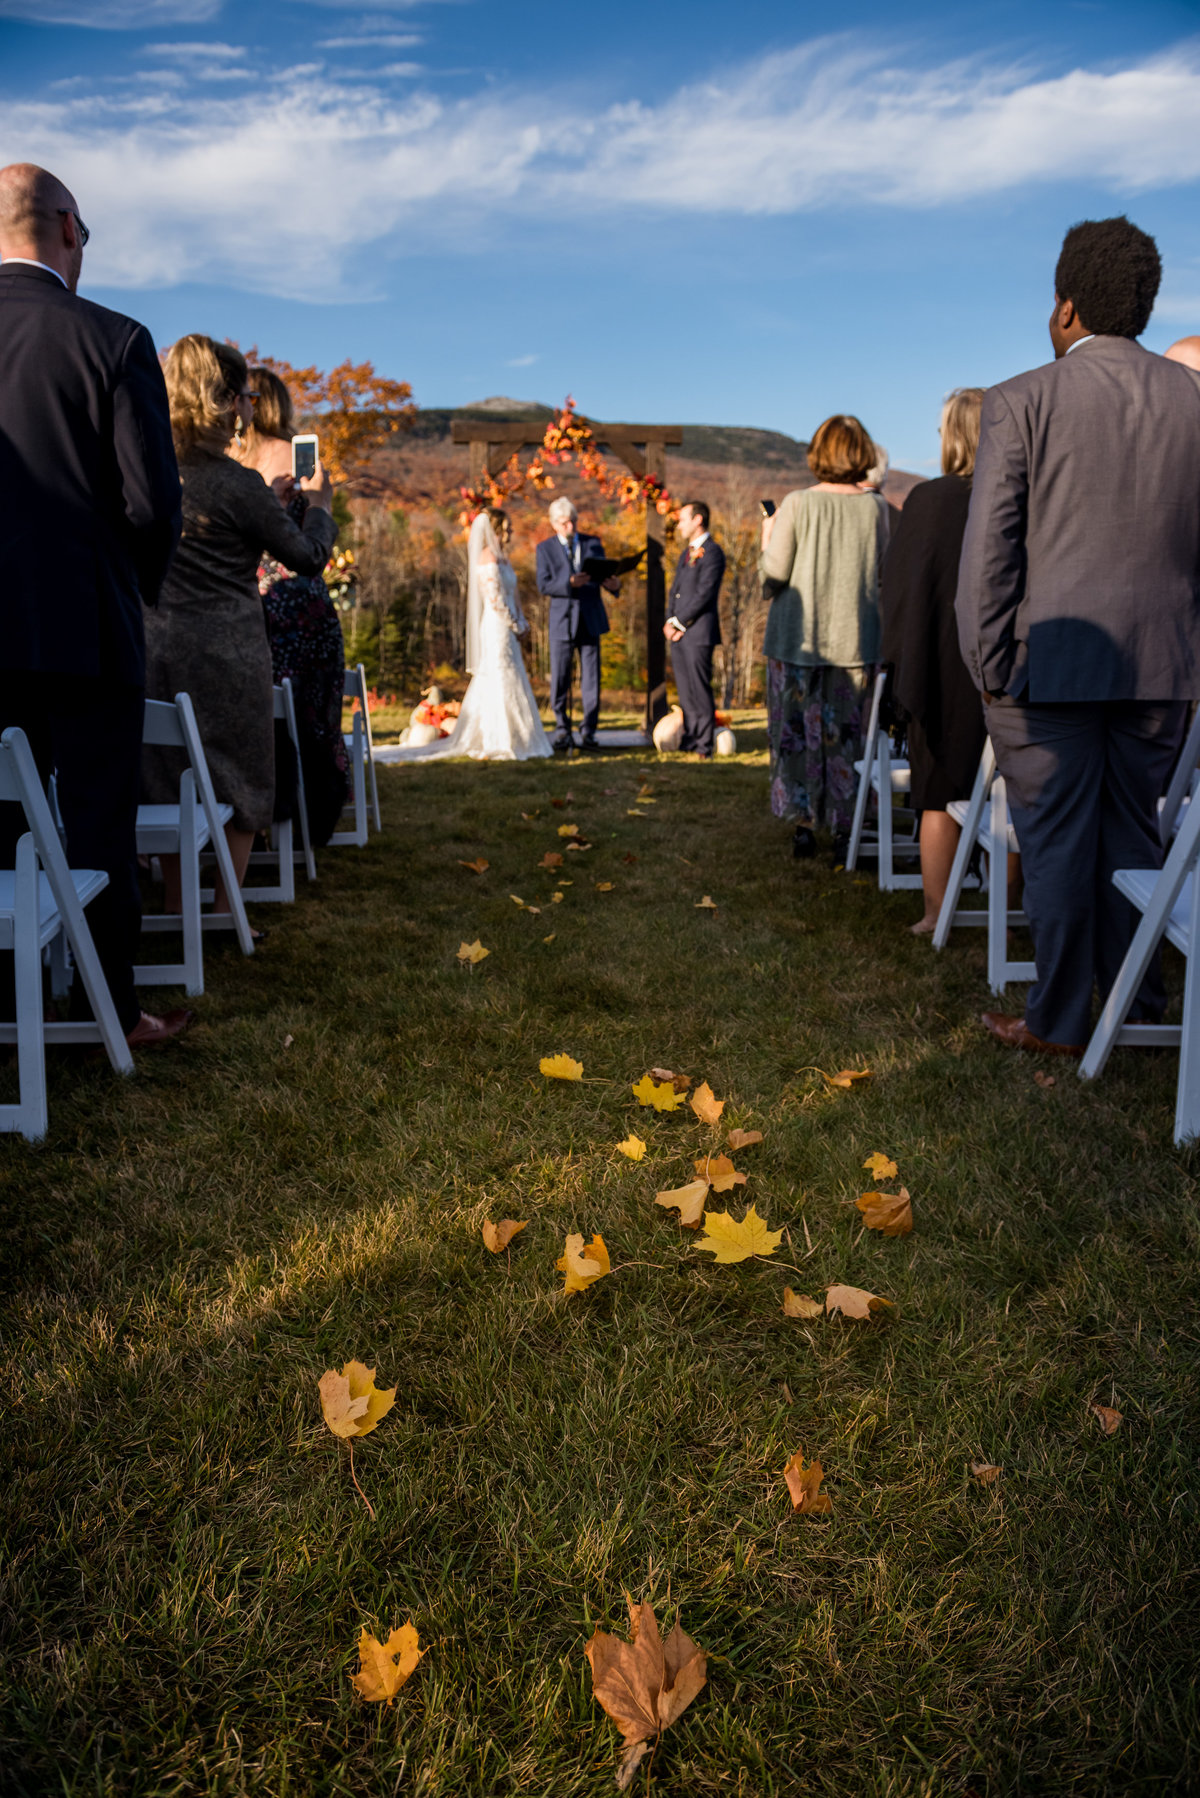 leaves on the ground during fall wedding in outdoor venue NH